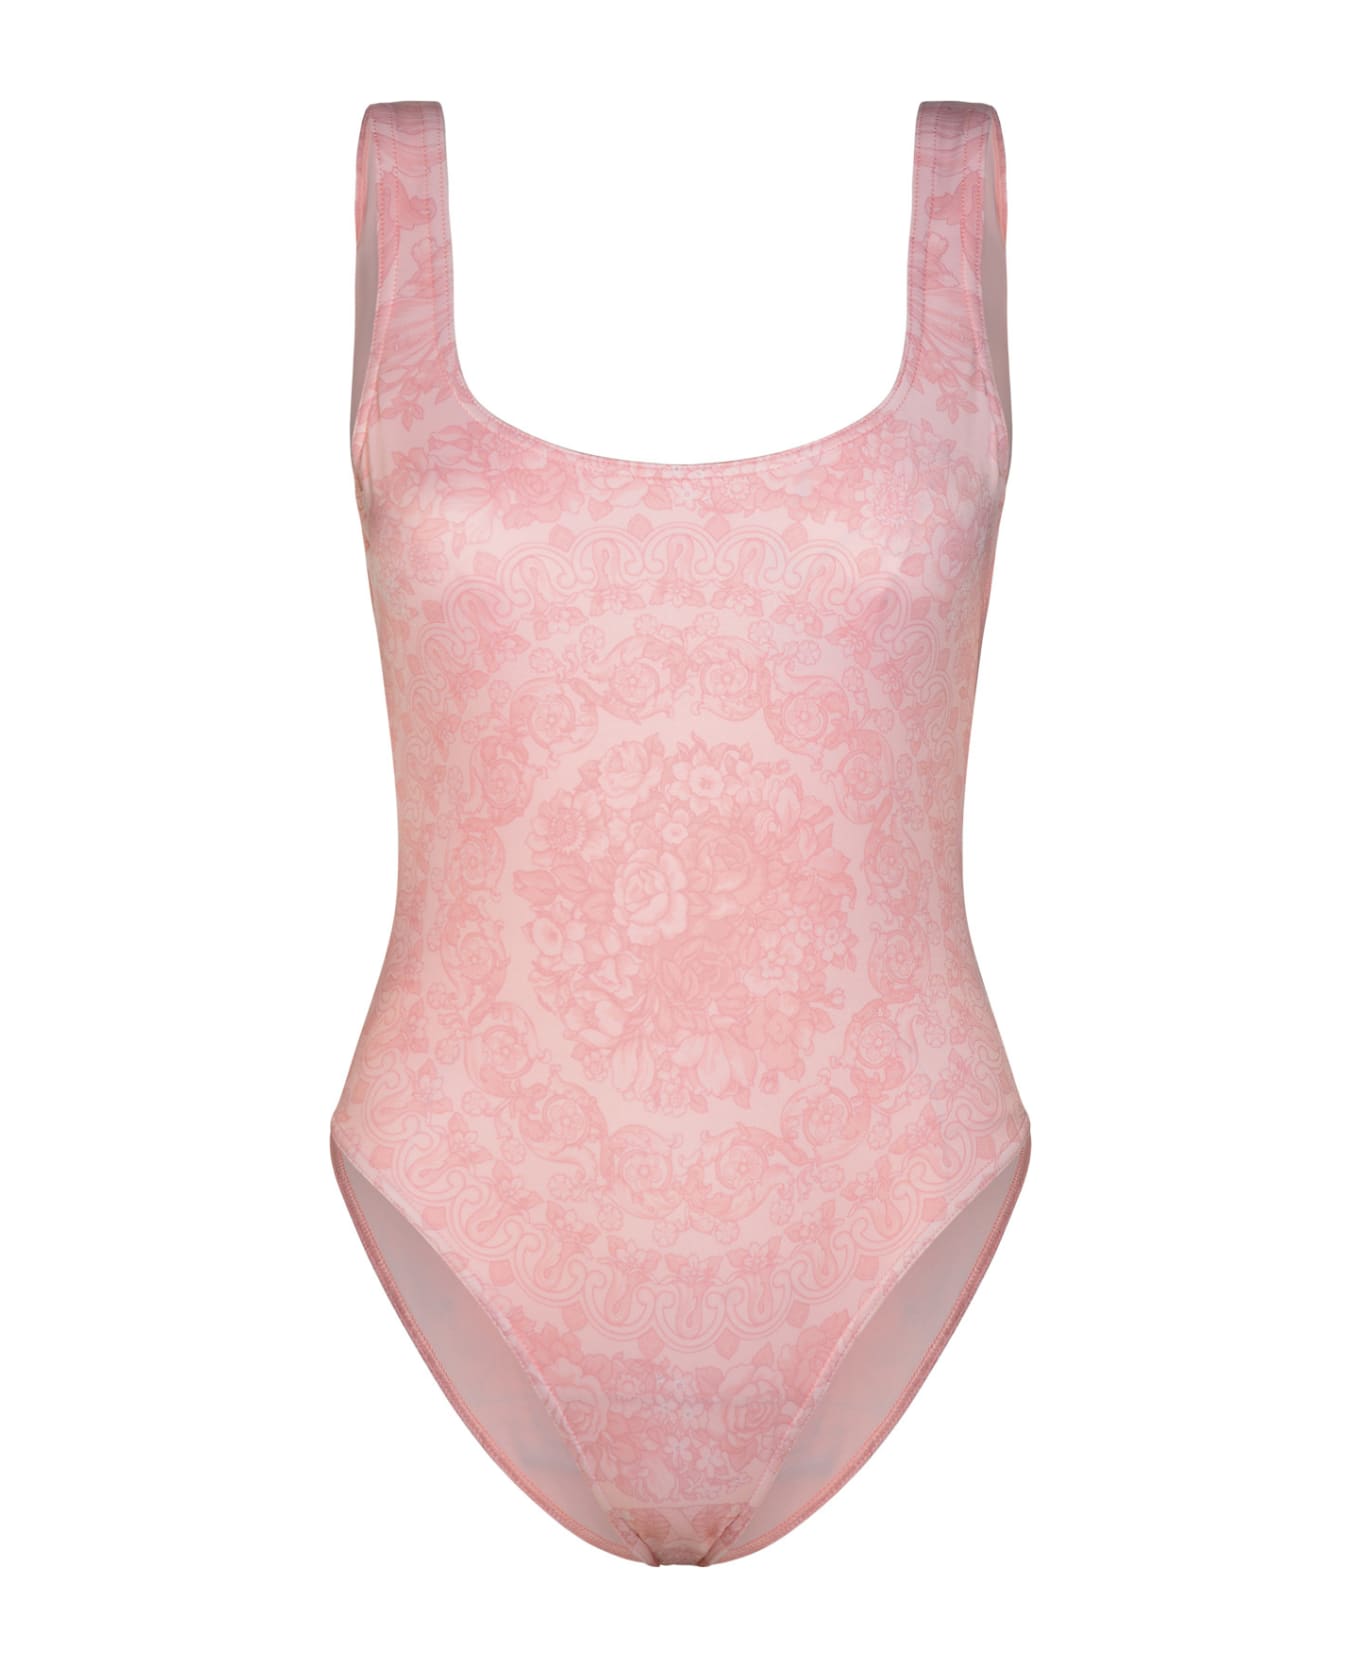 Versace 'barocco' One-piece Swimsuit In Pink Polyester Blend - Pale Pink 水着